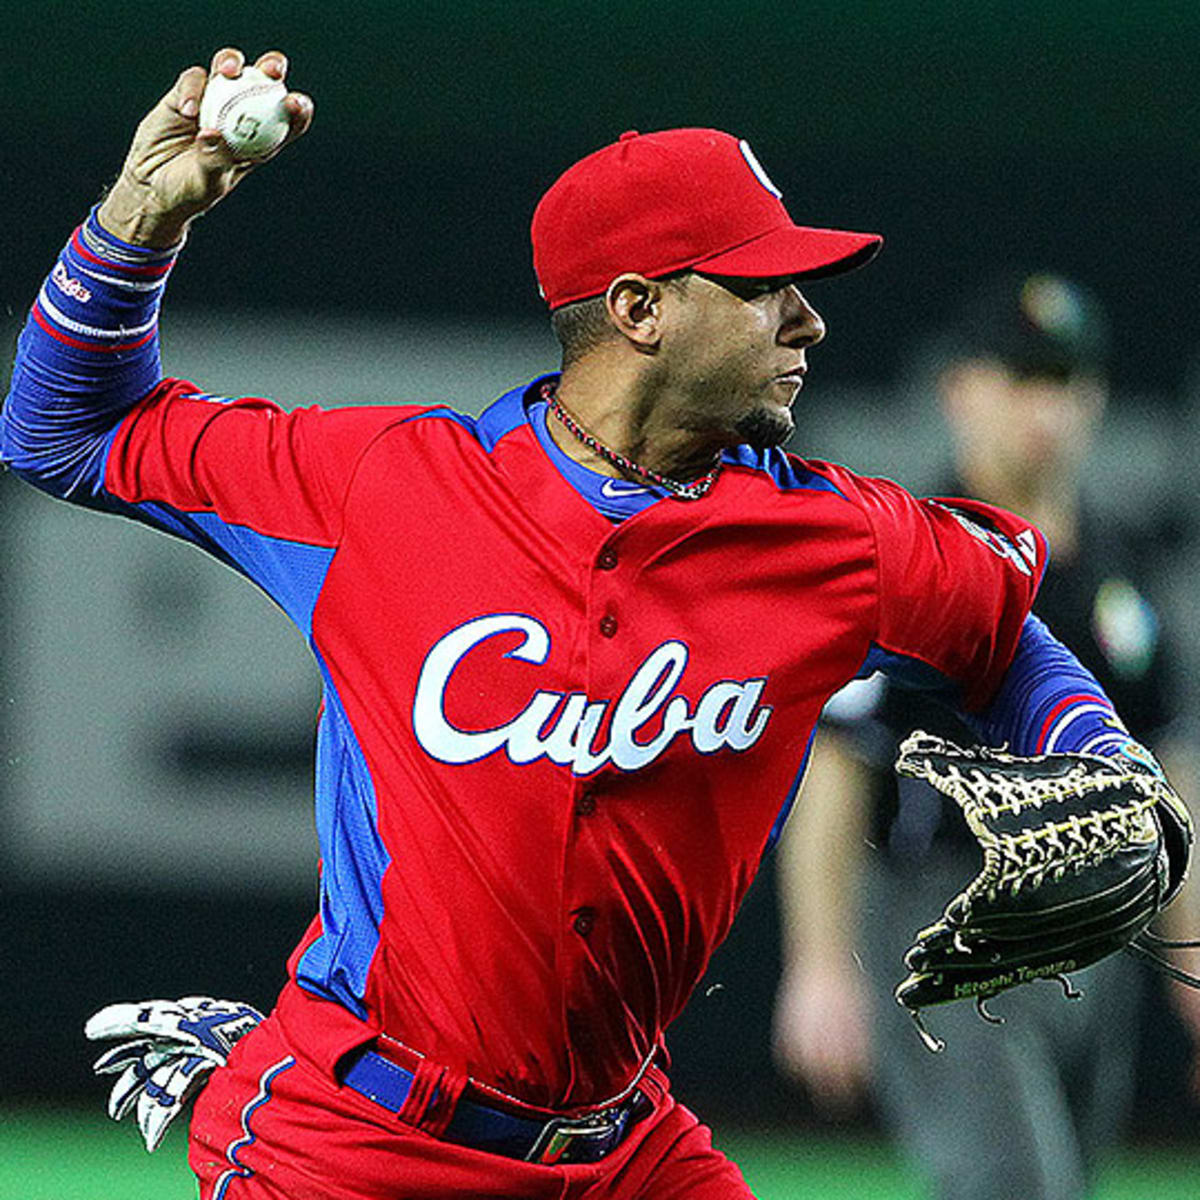 Yulieski Gurriel's first game for GCL Astros